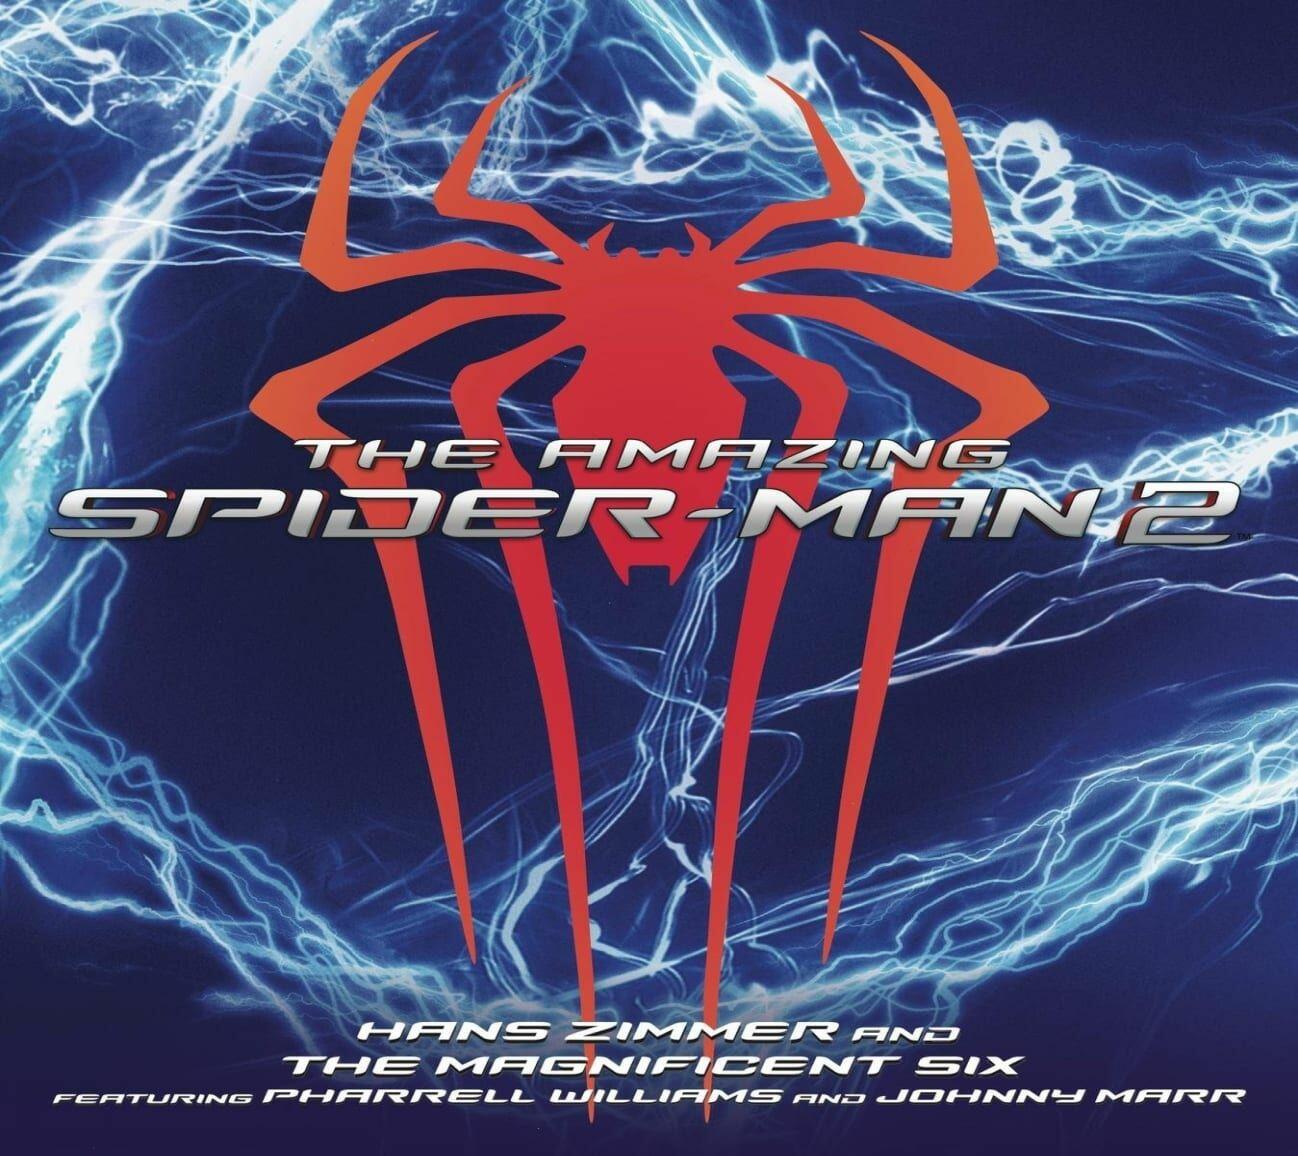 The Amazing Spider-Man 2 (Soundtrack) (CD) on MovieShack